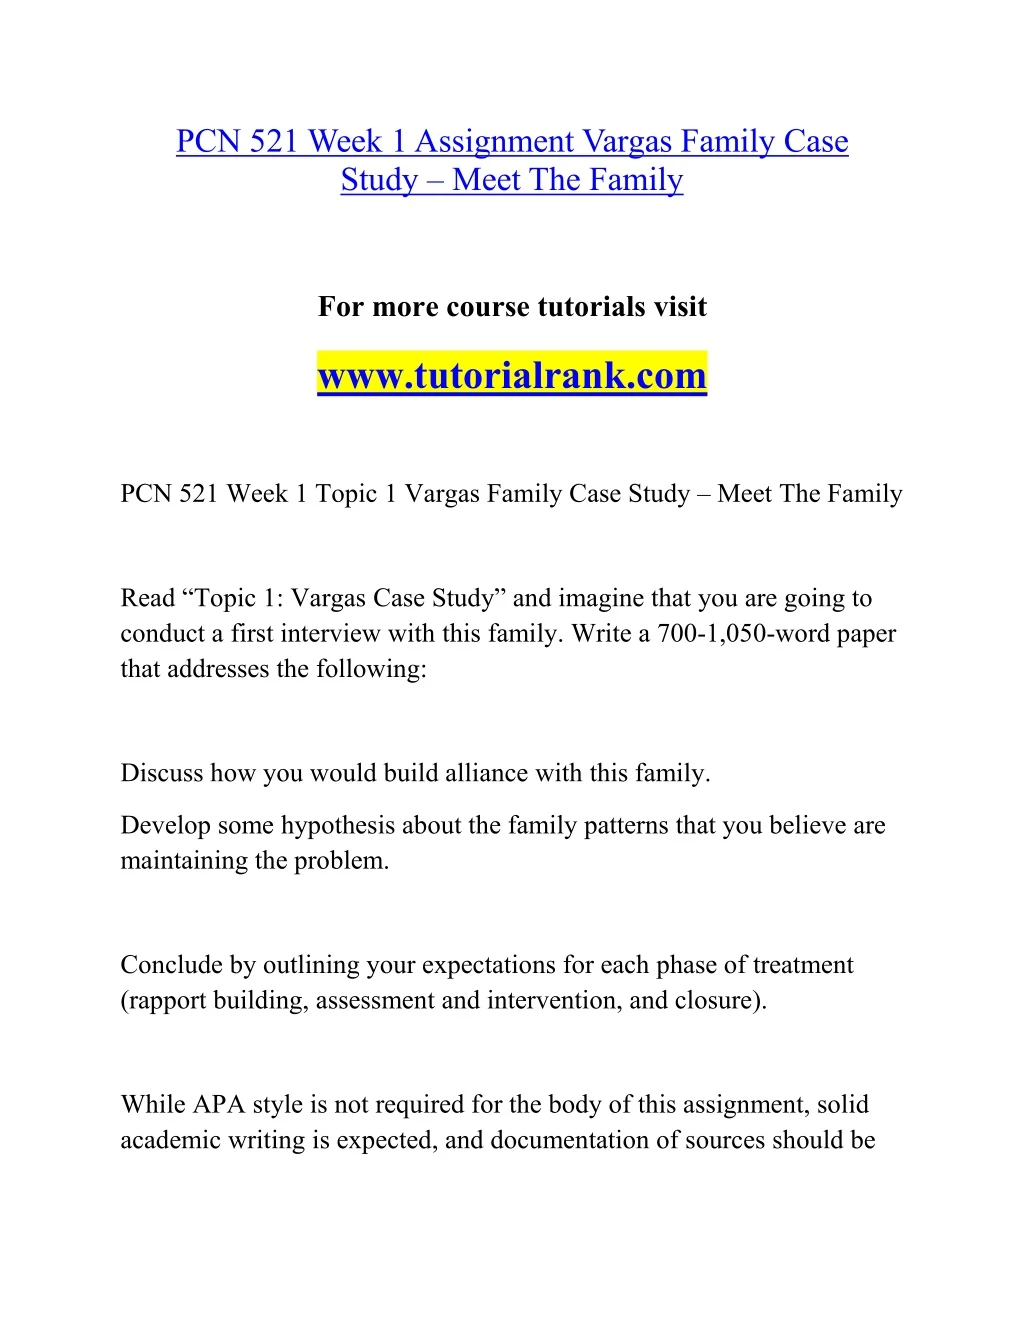 pcn 521 week 1assignment vargas family case study